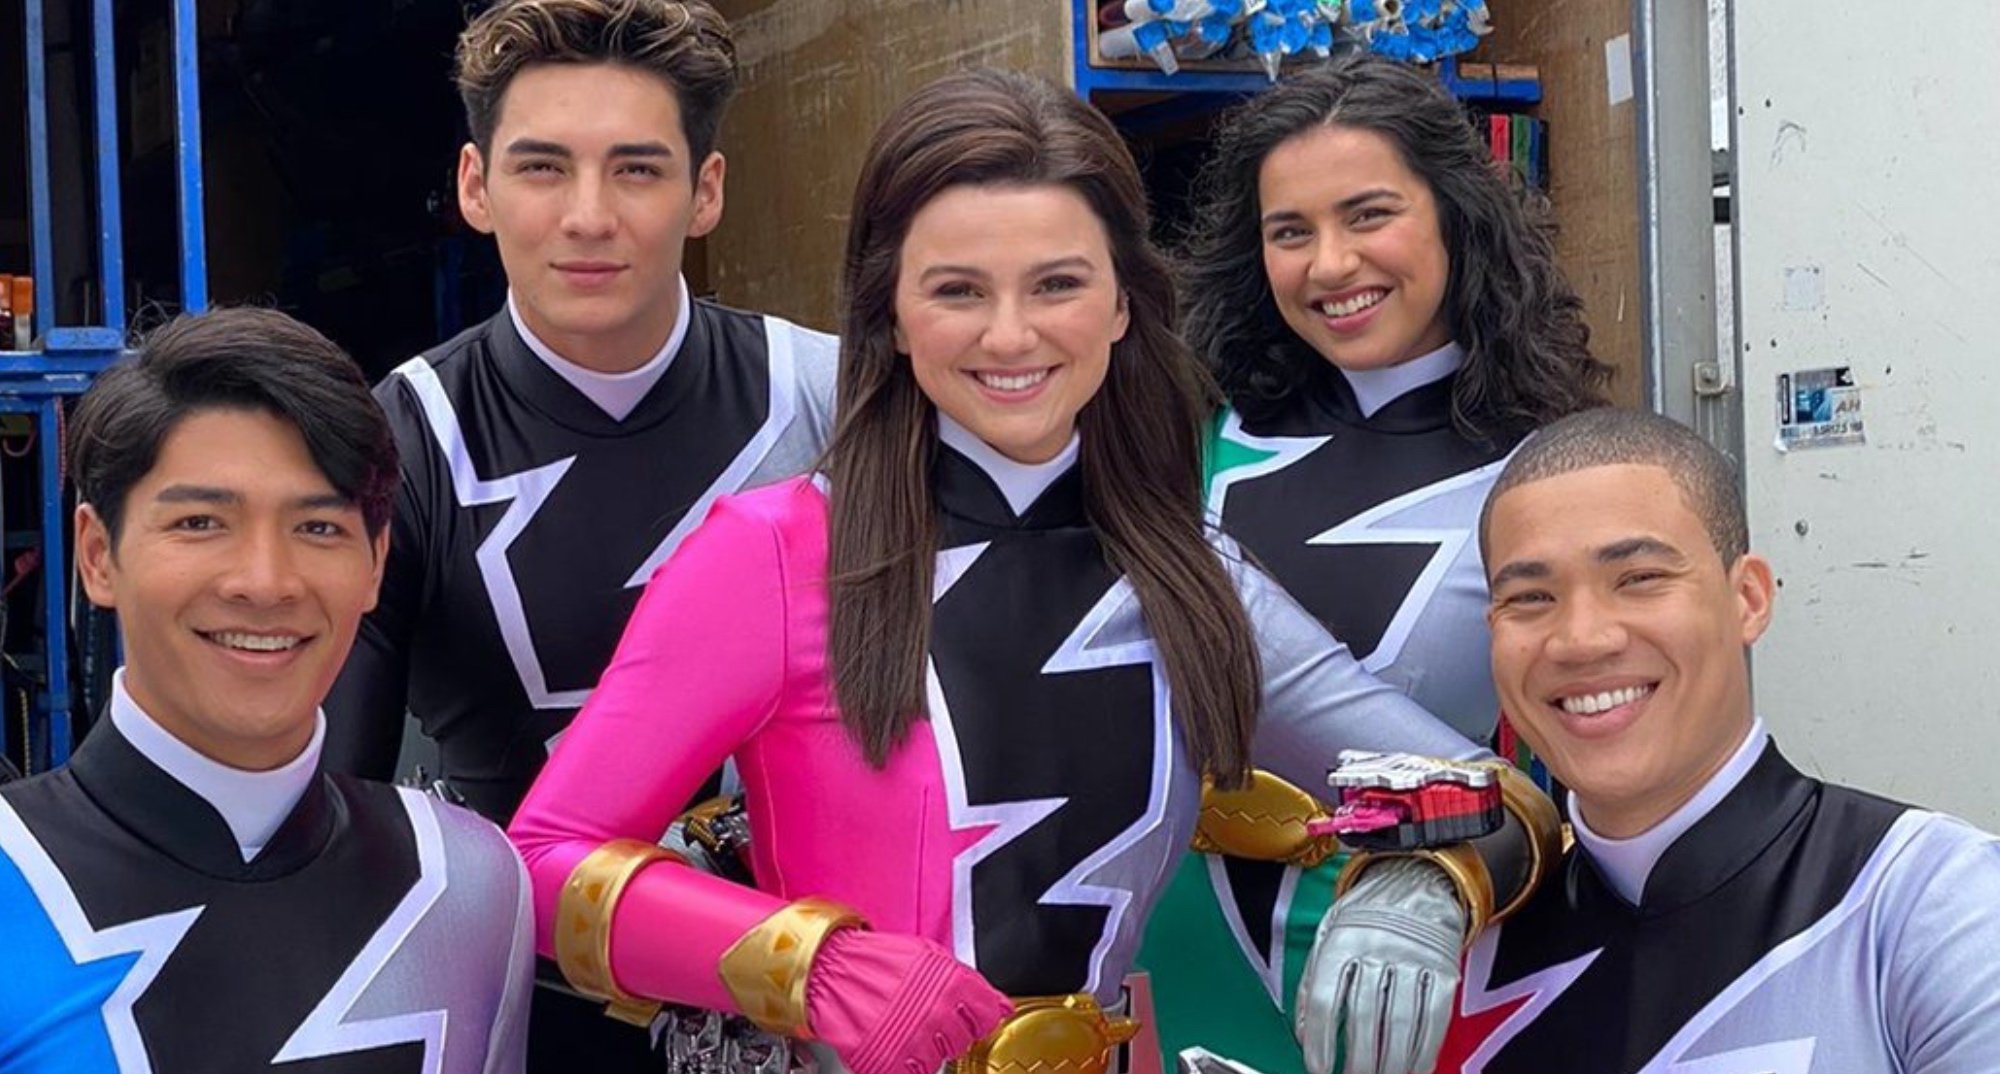 Hunter Dino and Tessa Rao with cast of 'Power Rangers Dino Fury' in Ranger suits.